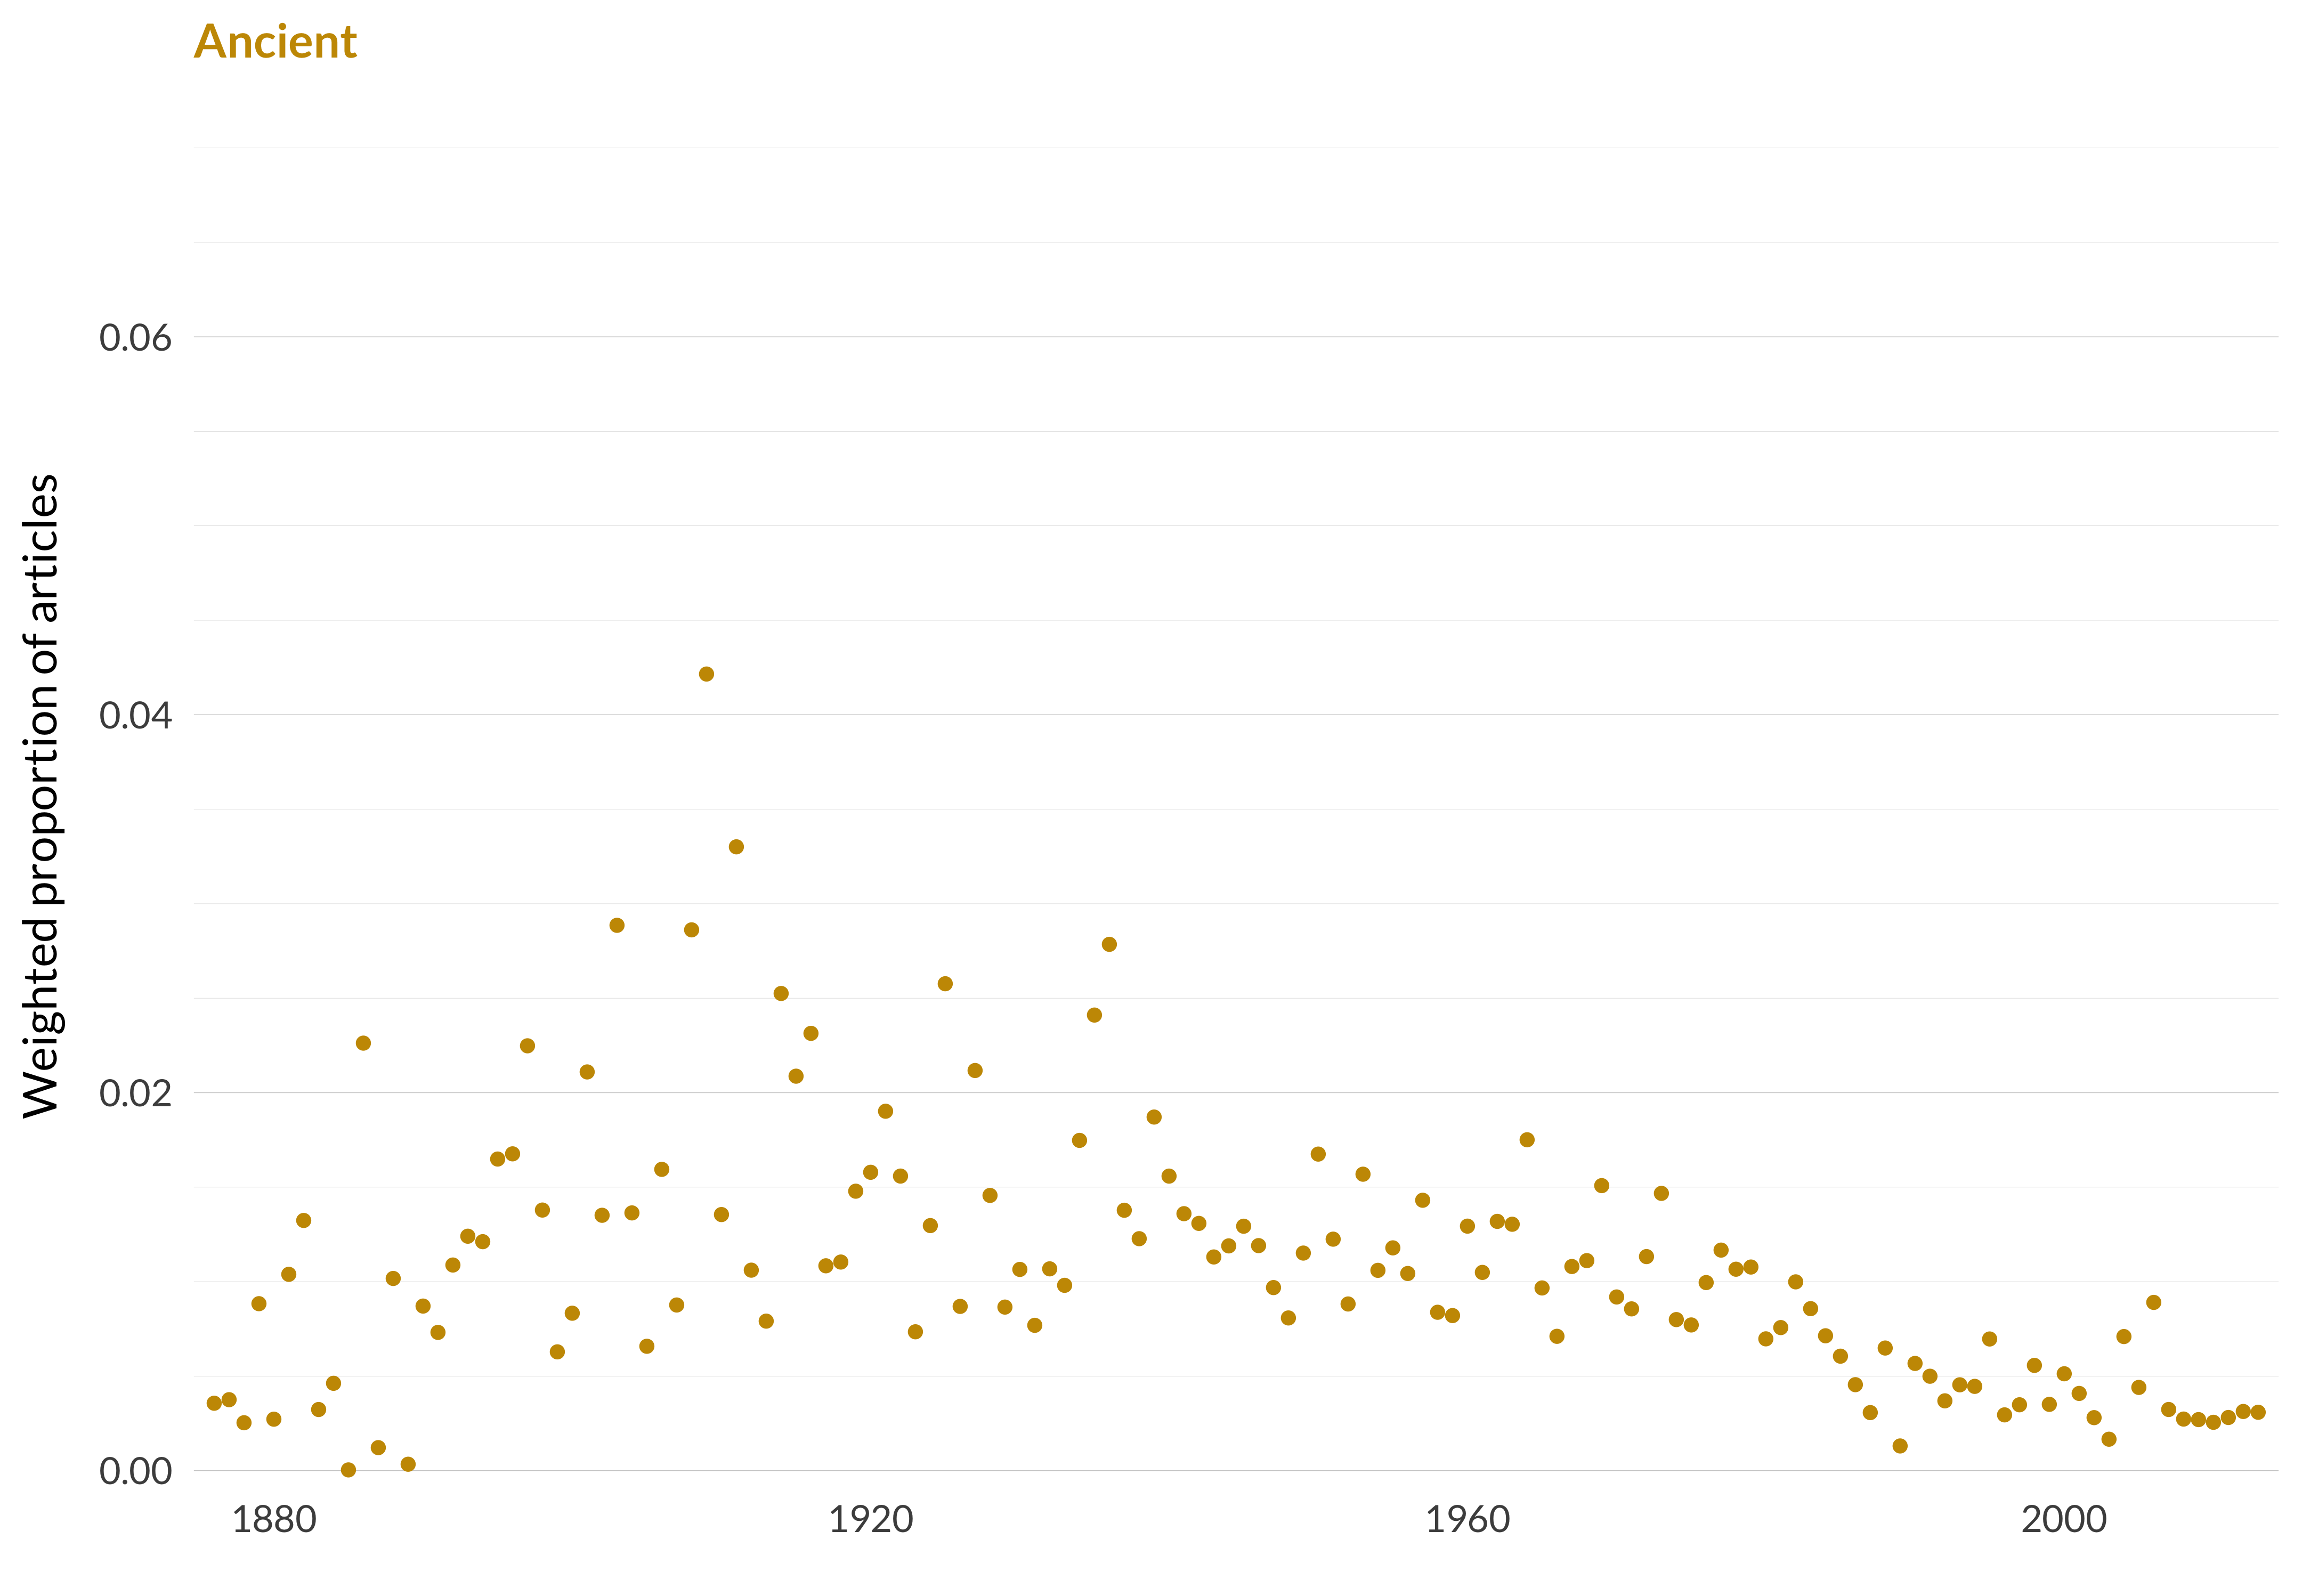 A scatterplot showing which proportion of articles each year are in the ancienttopic. The x-axis shows the year, the y-axis measures the proportion of articles each year in this topic. There is one dot per year. The highest value is in 1909 when 4.2% of articles were in this topic. The lowest value is in 1885 when 0.0% of articles were in this topic. The full table that provides the data for this graph is available in Table A.13 in Appendix A.